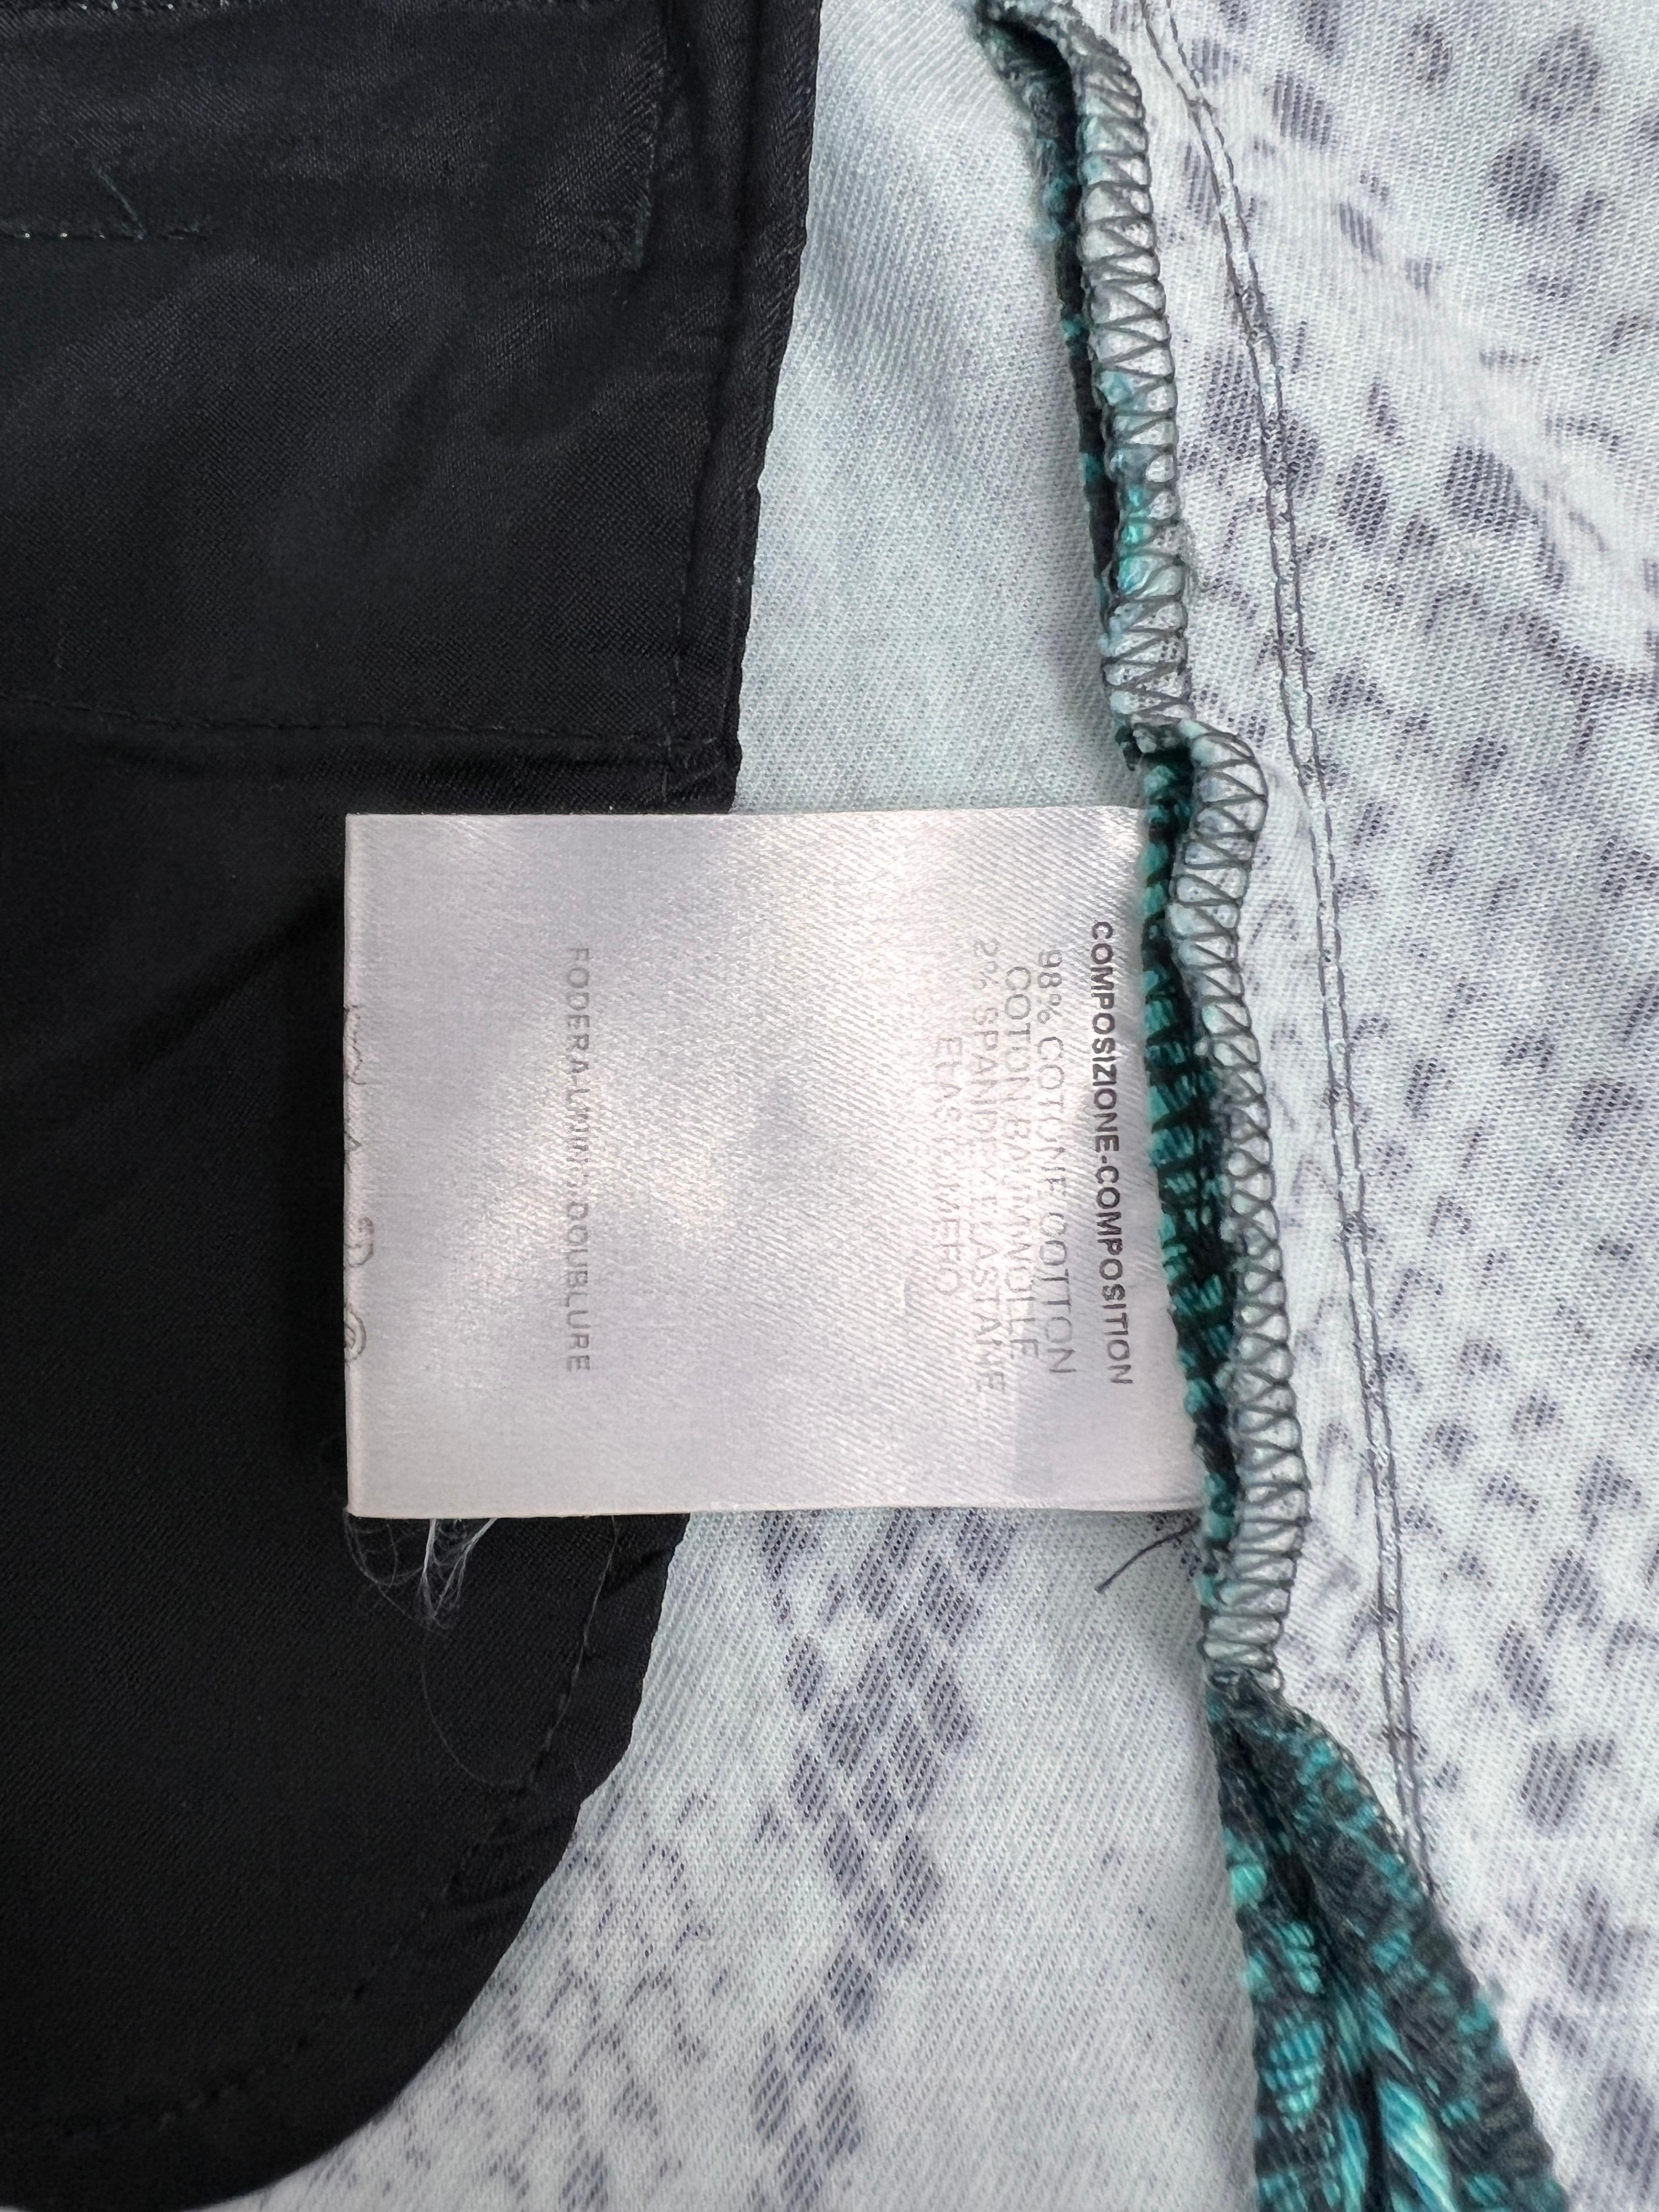 Gucci Spring 2000 Python Print Teal Pants In Excellent Condition For Sale In Prague, CZ